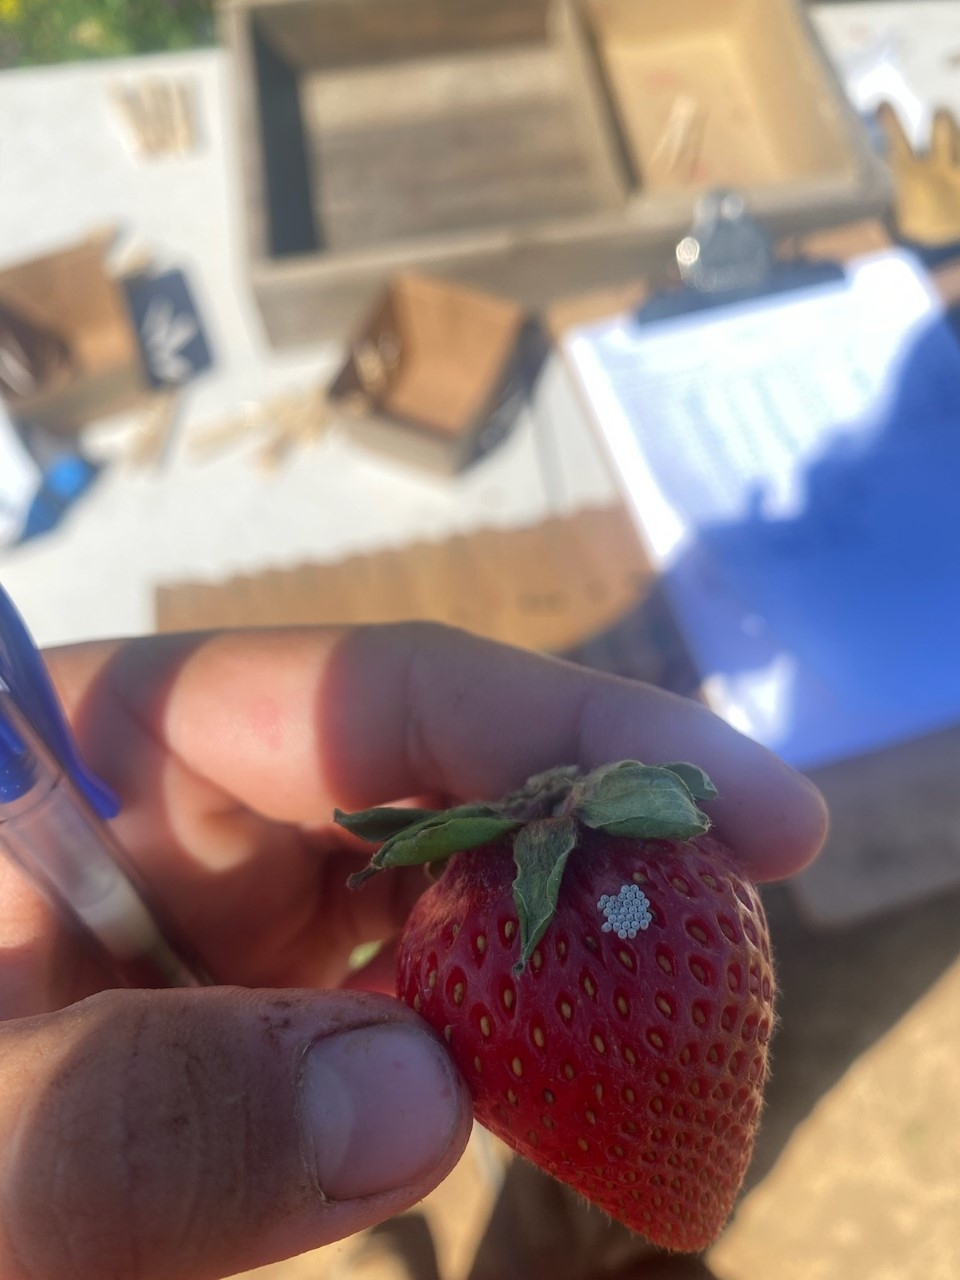 This Freaky Fruit Fly Lays Eggs in Your Strawberries